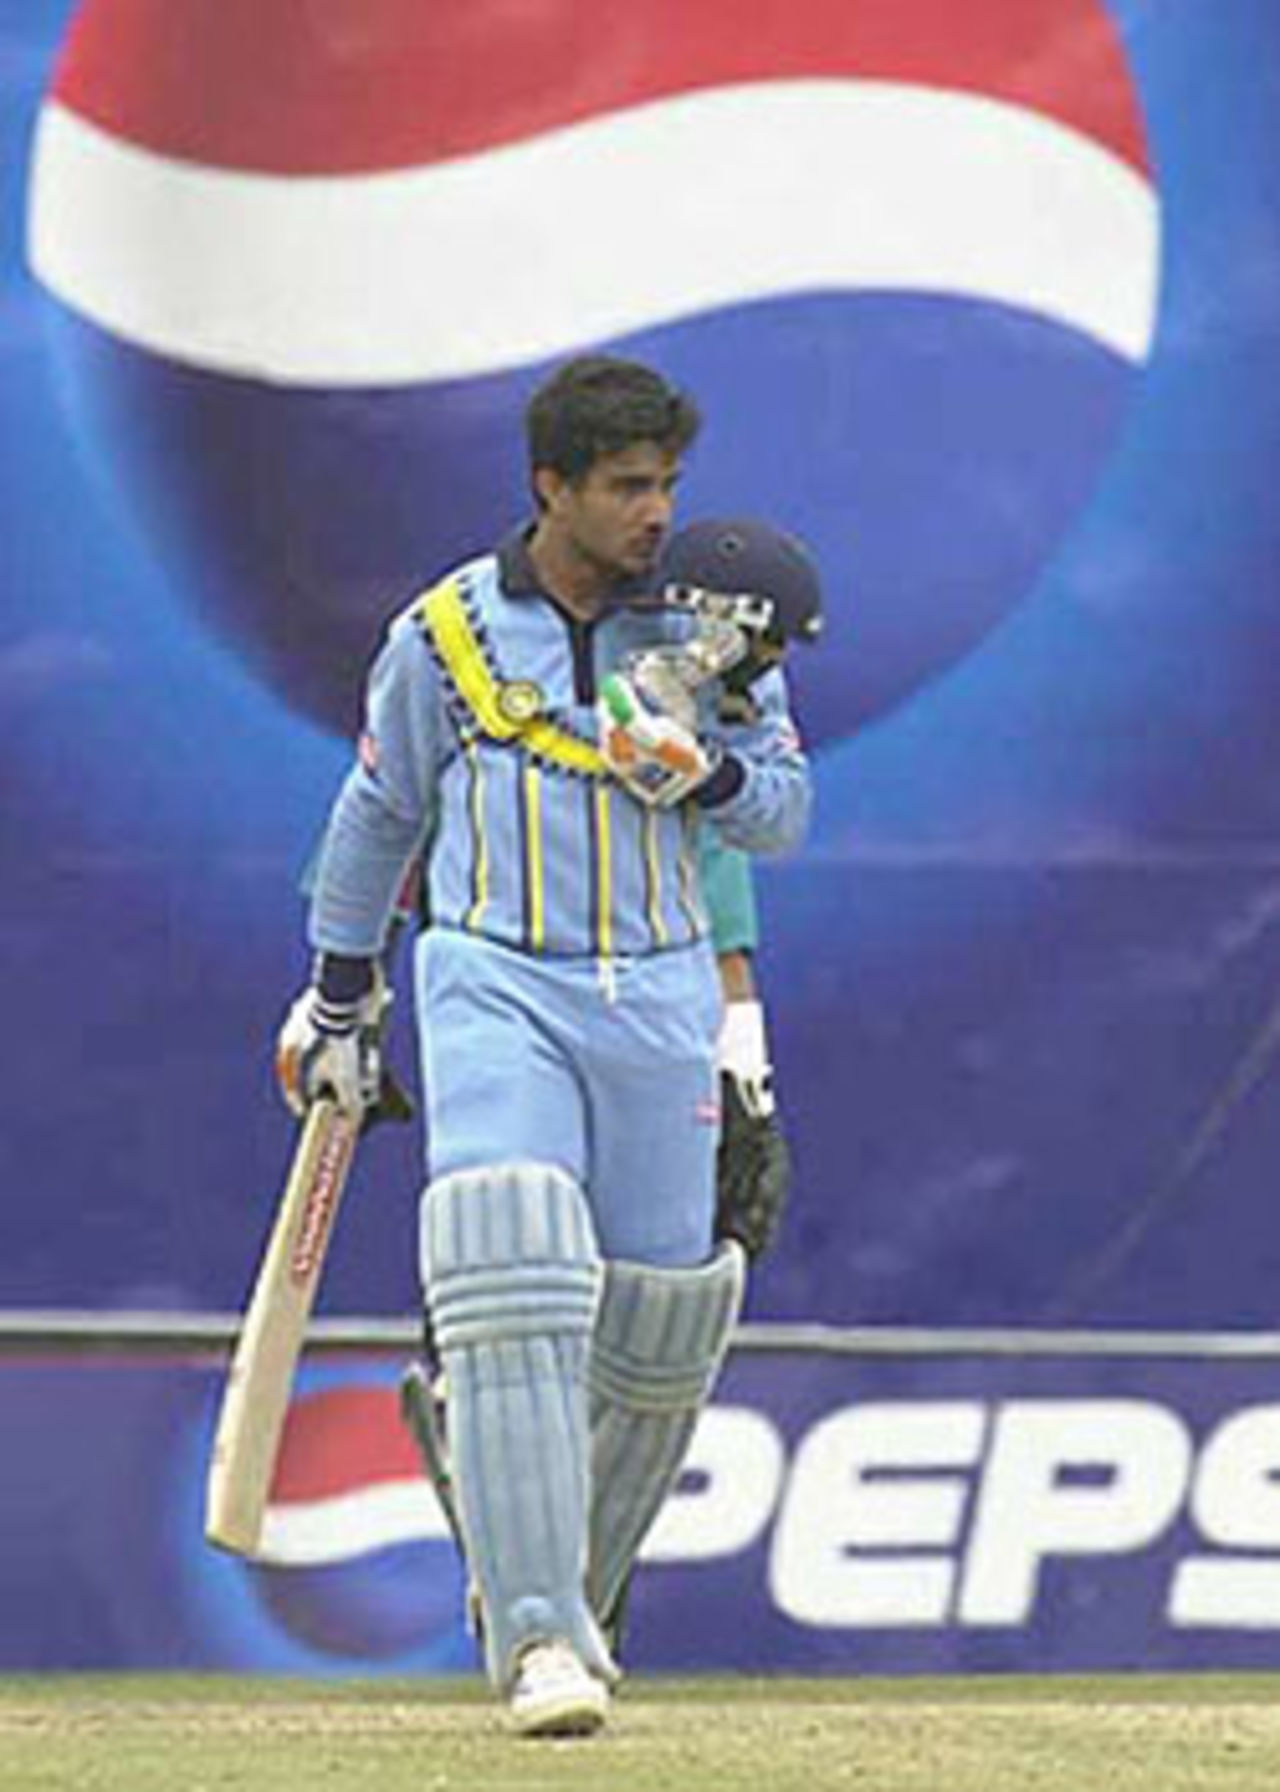 Ganguly kisses the Indian emblem on his helmet on reaching his century, ICC KnockOut, 2000/01, Final, India v New Zealand, Gymkhana Club Ground, Nairobi, 15 October 2000.